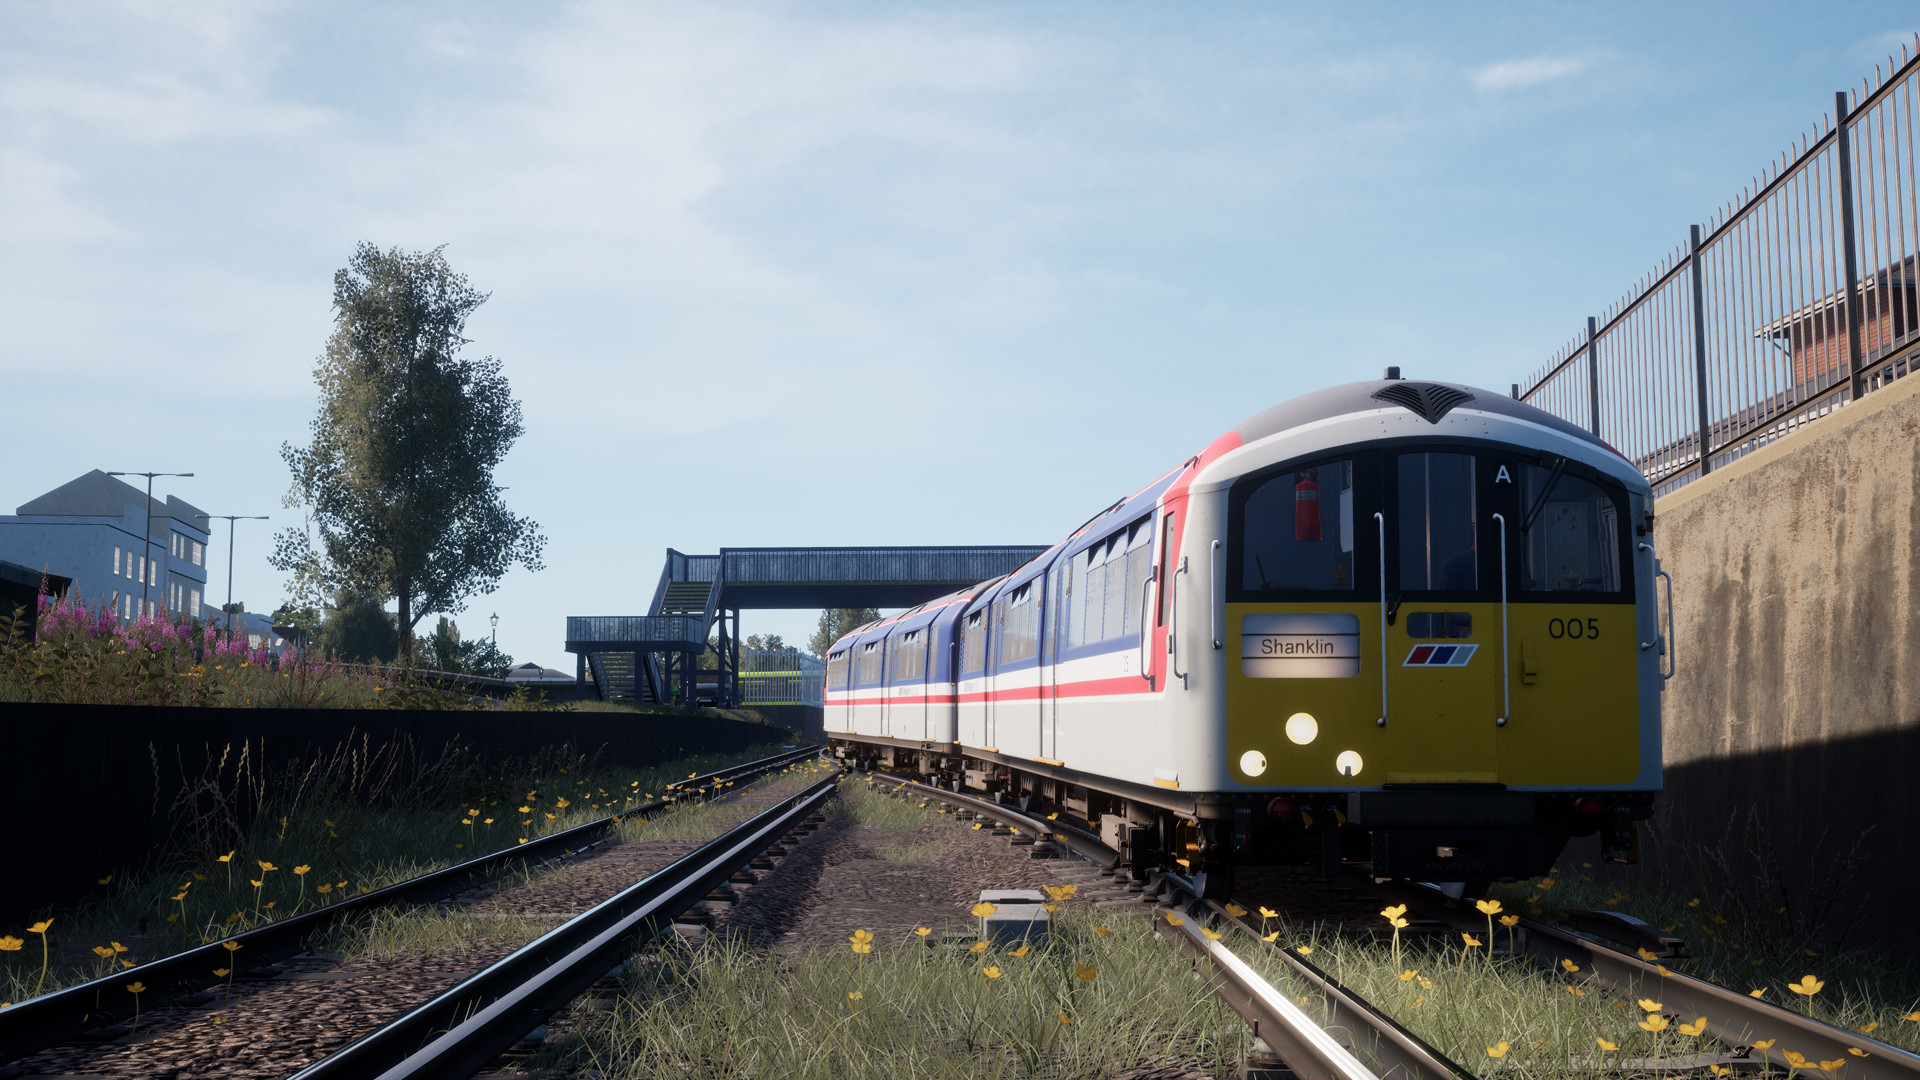 Train Sim World® 2: Isle Of Wight: Ryde - Shanklin Route Add-On Featured Screenshot #1